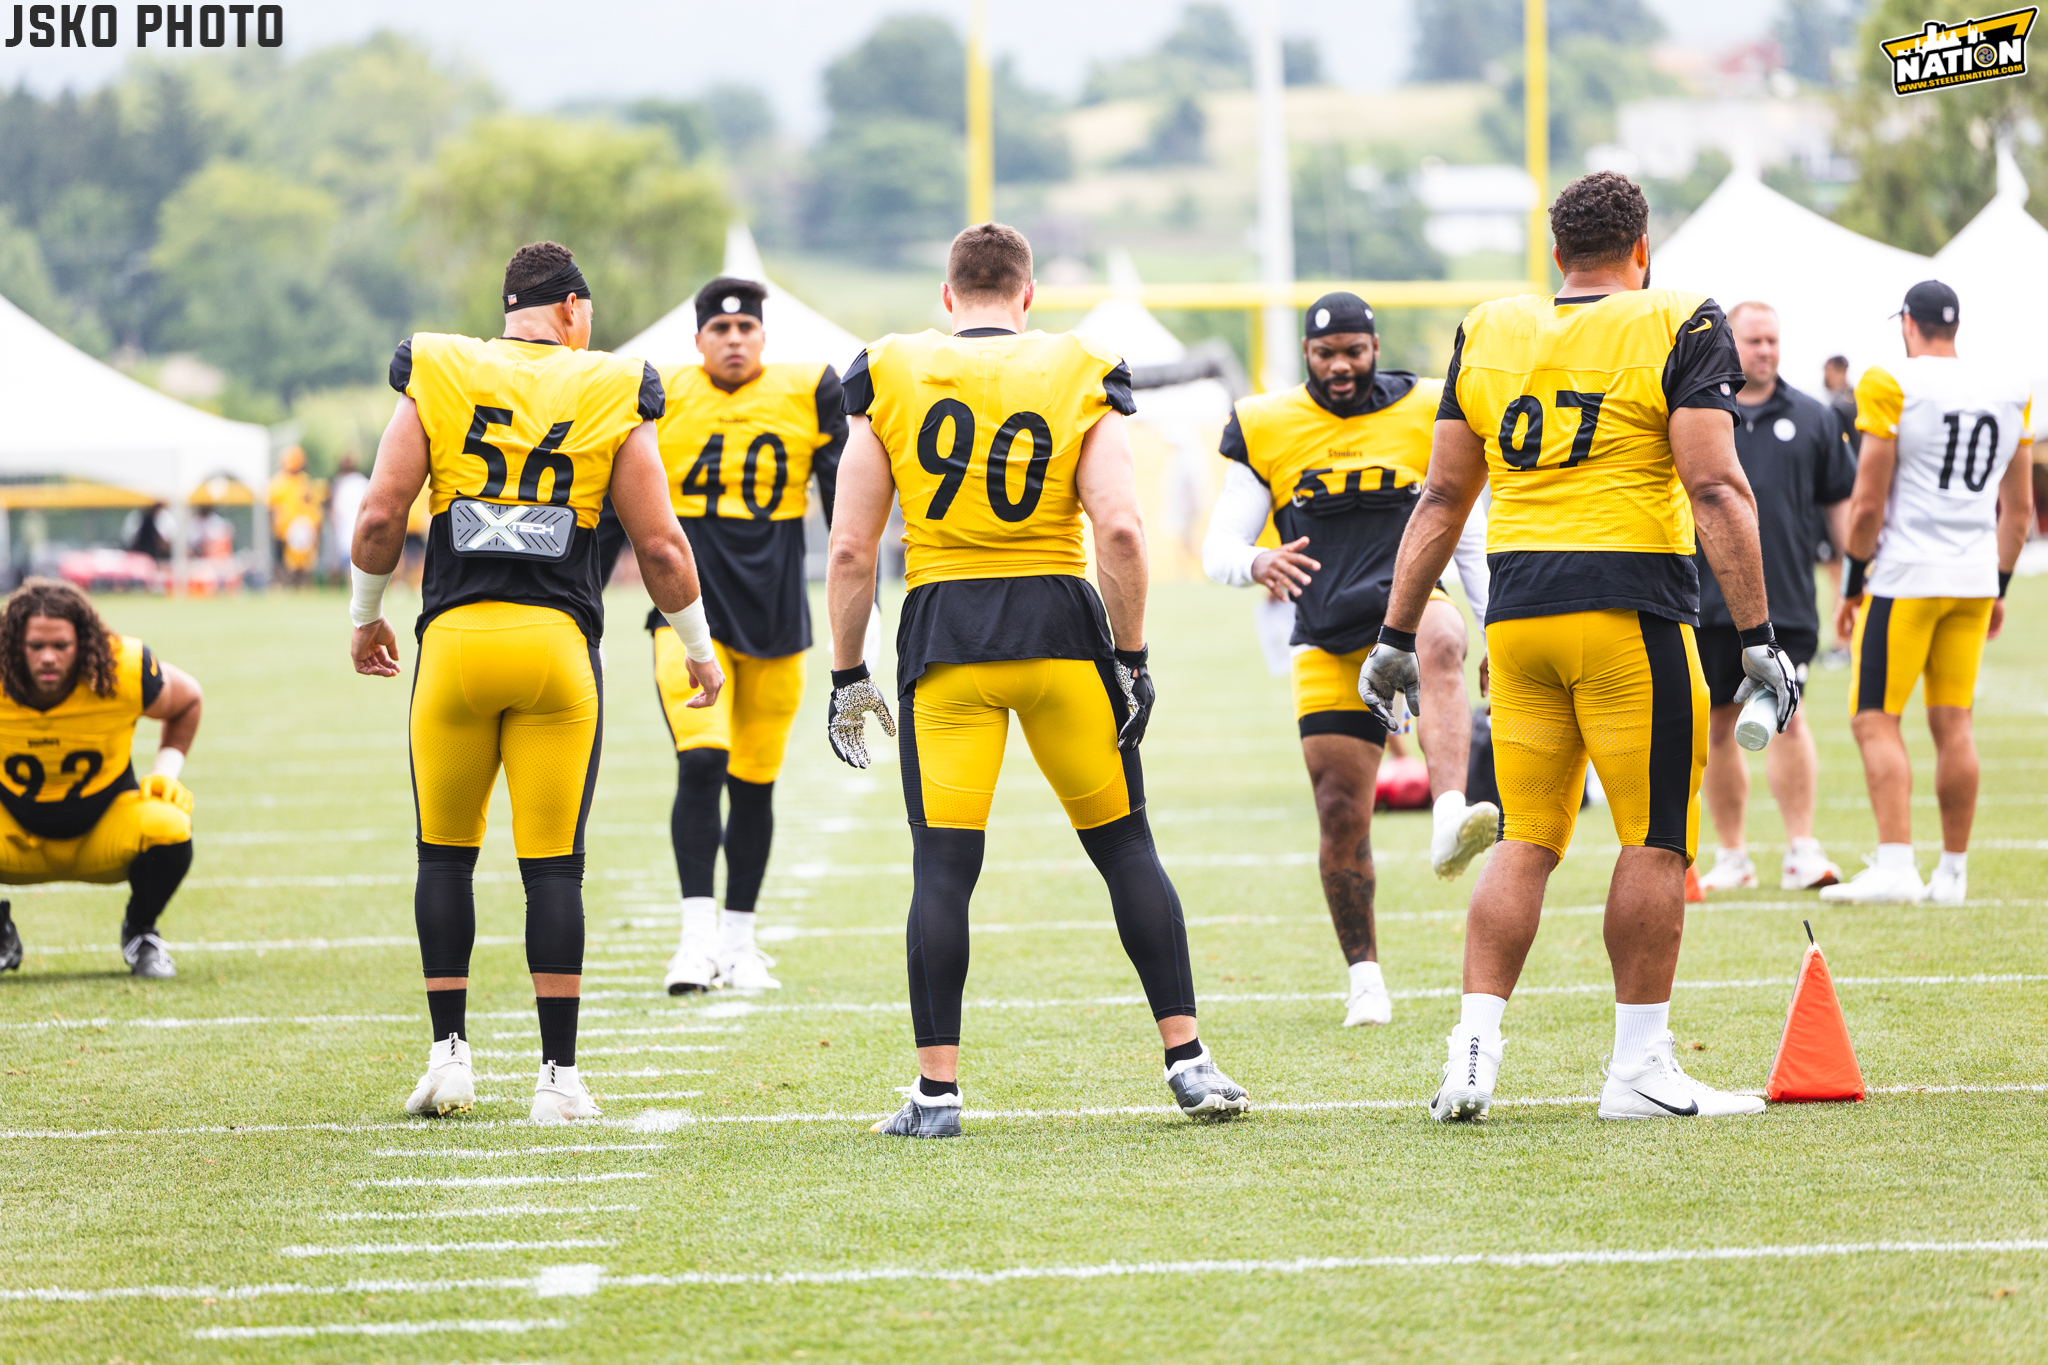 The Steelers Will Be An Absolute Handful;” Members Of 49ers Camp Issuing  Warning To Team